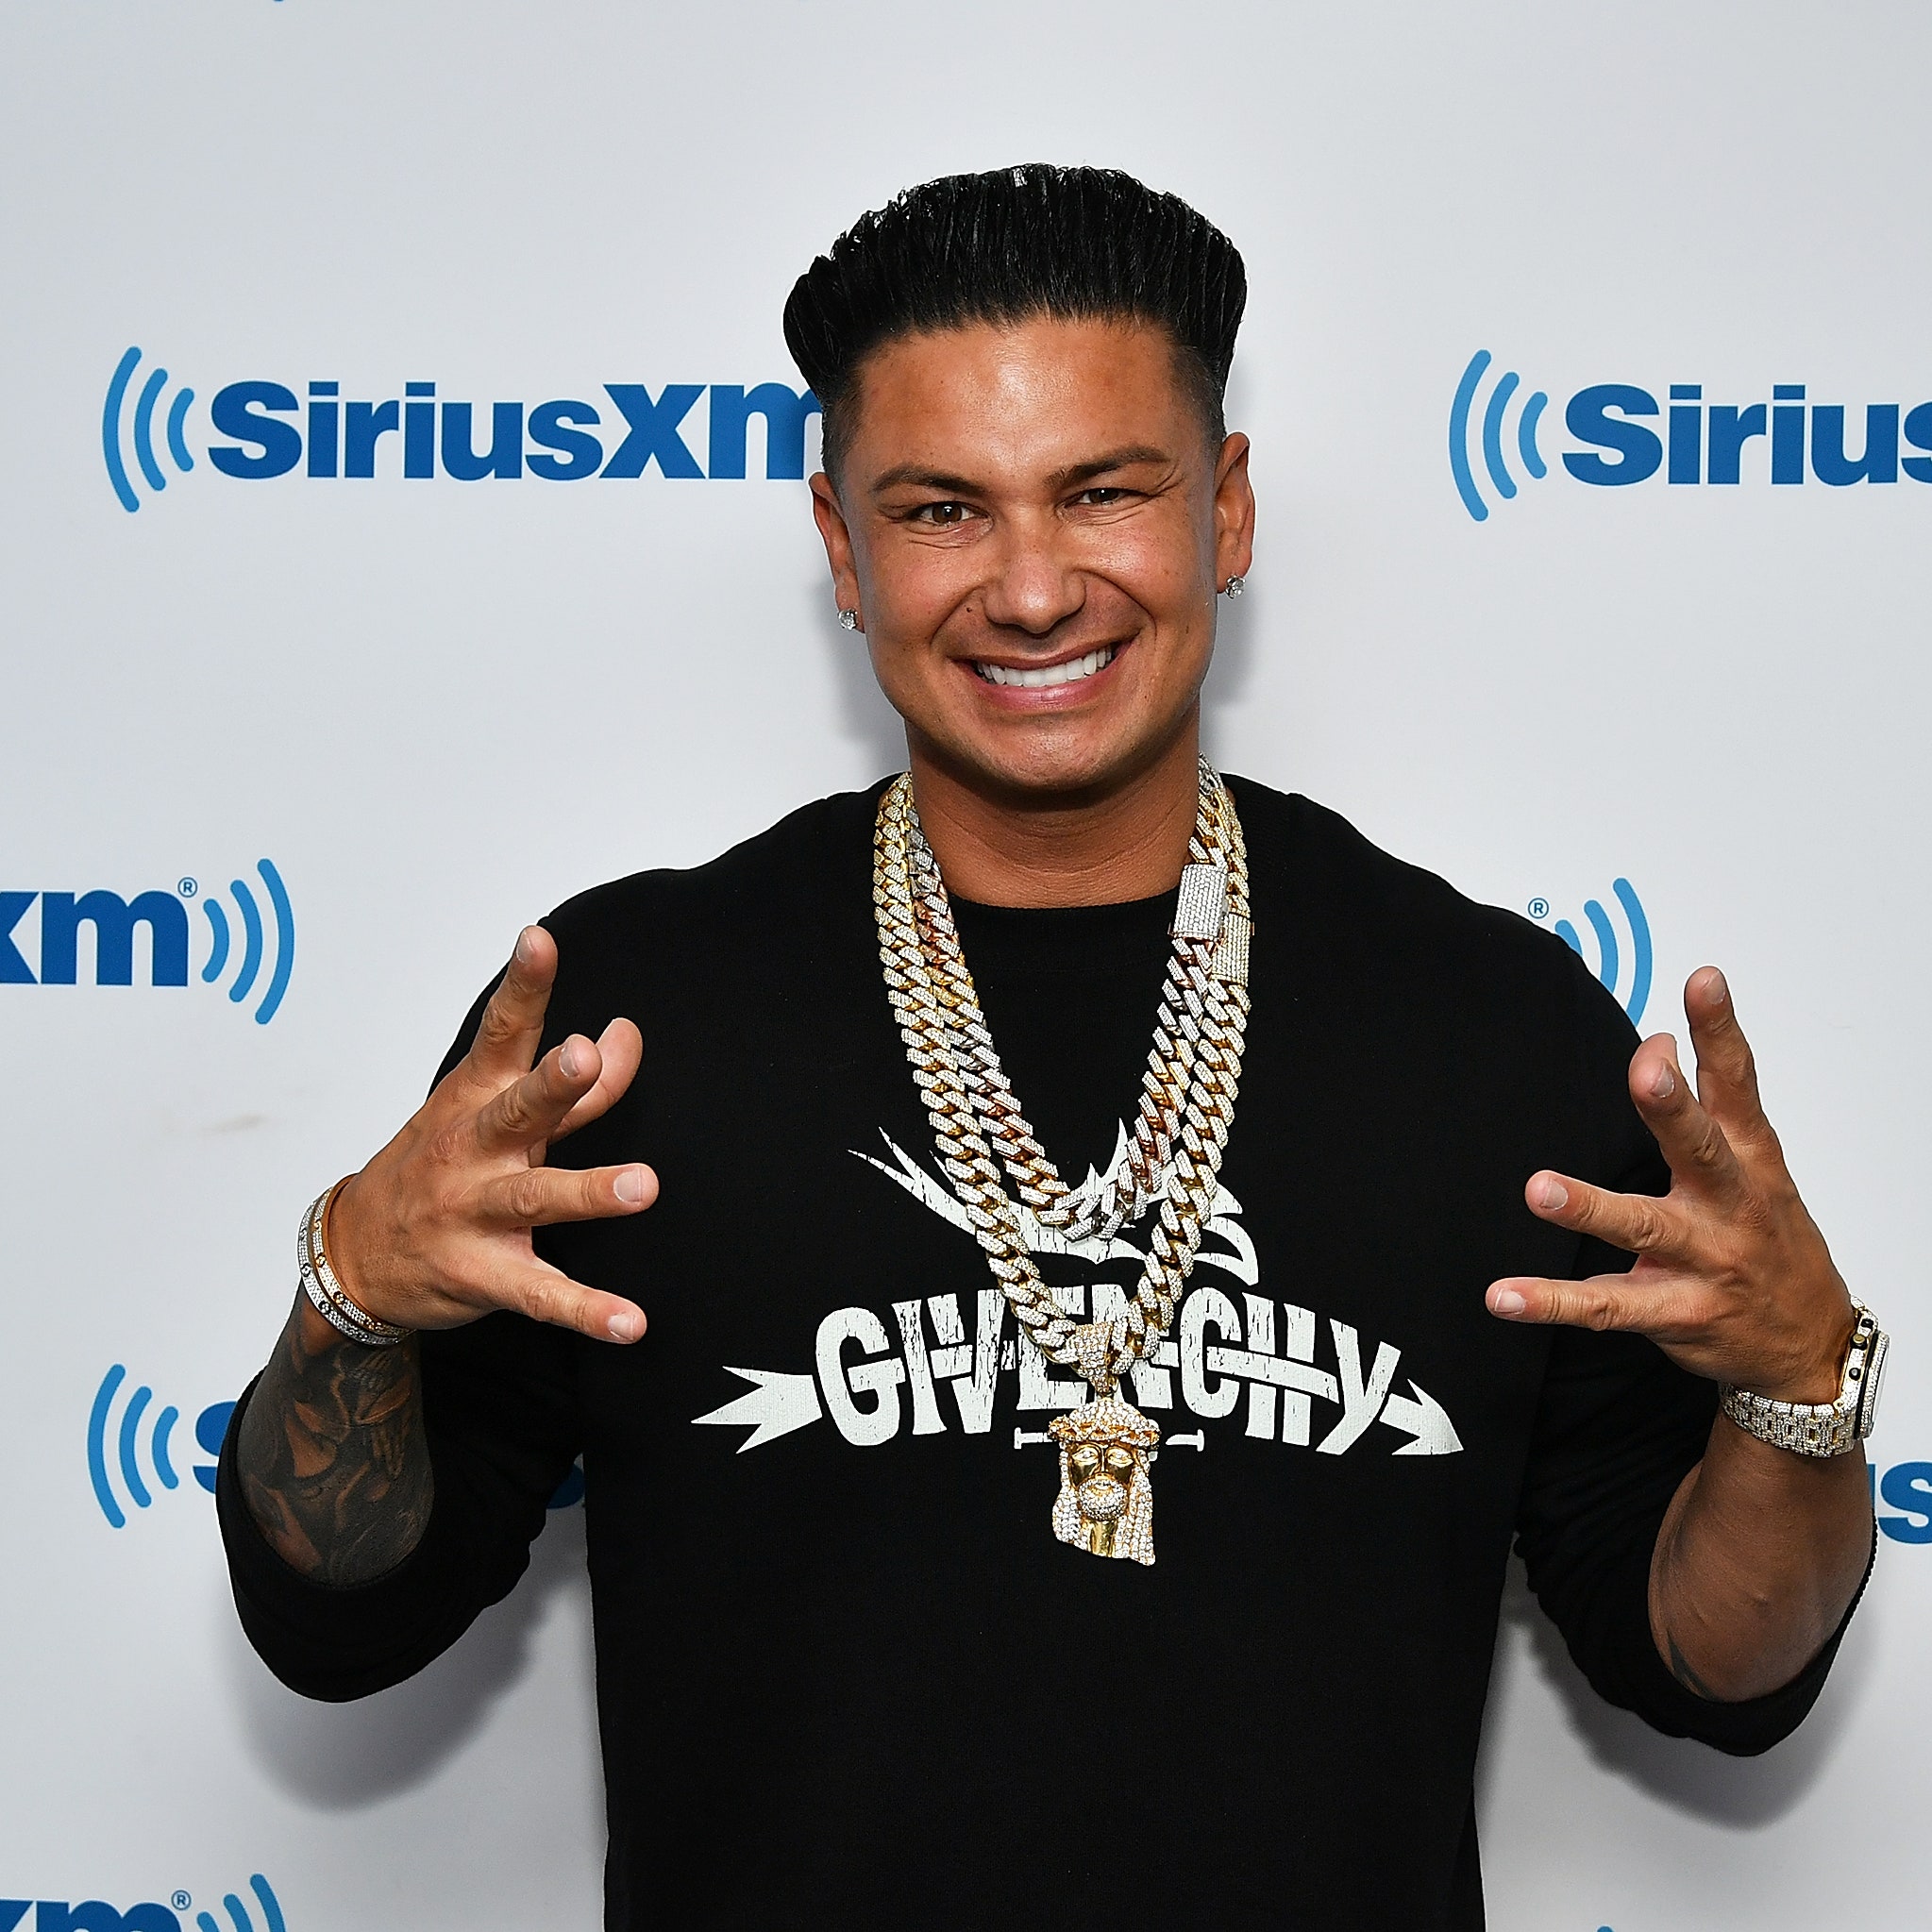 Pauly D of 'Jersey Shore' Posted a Selfie Without Hair Gel and Fans Are Shocked